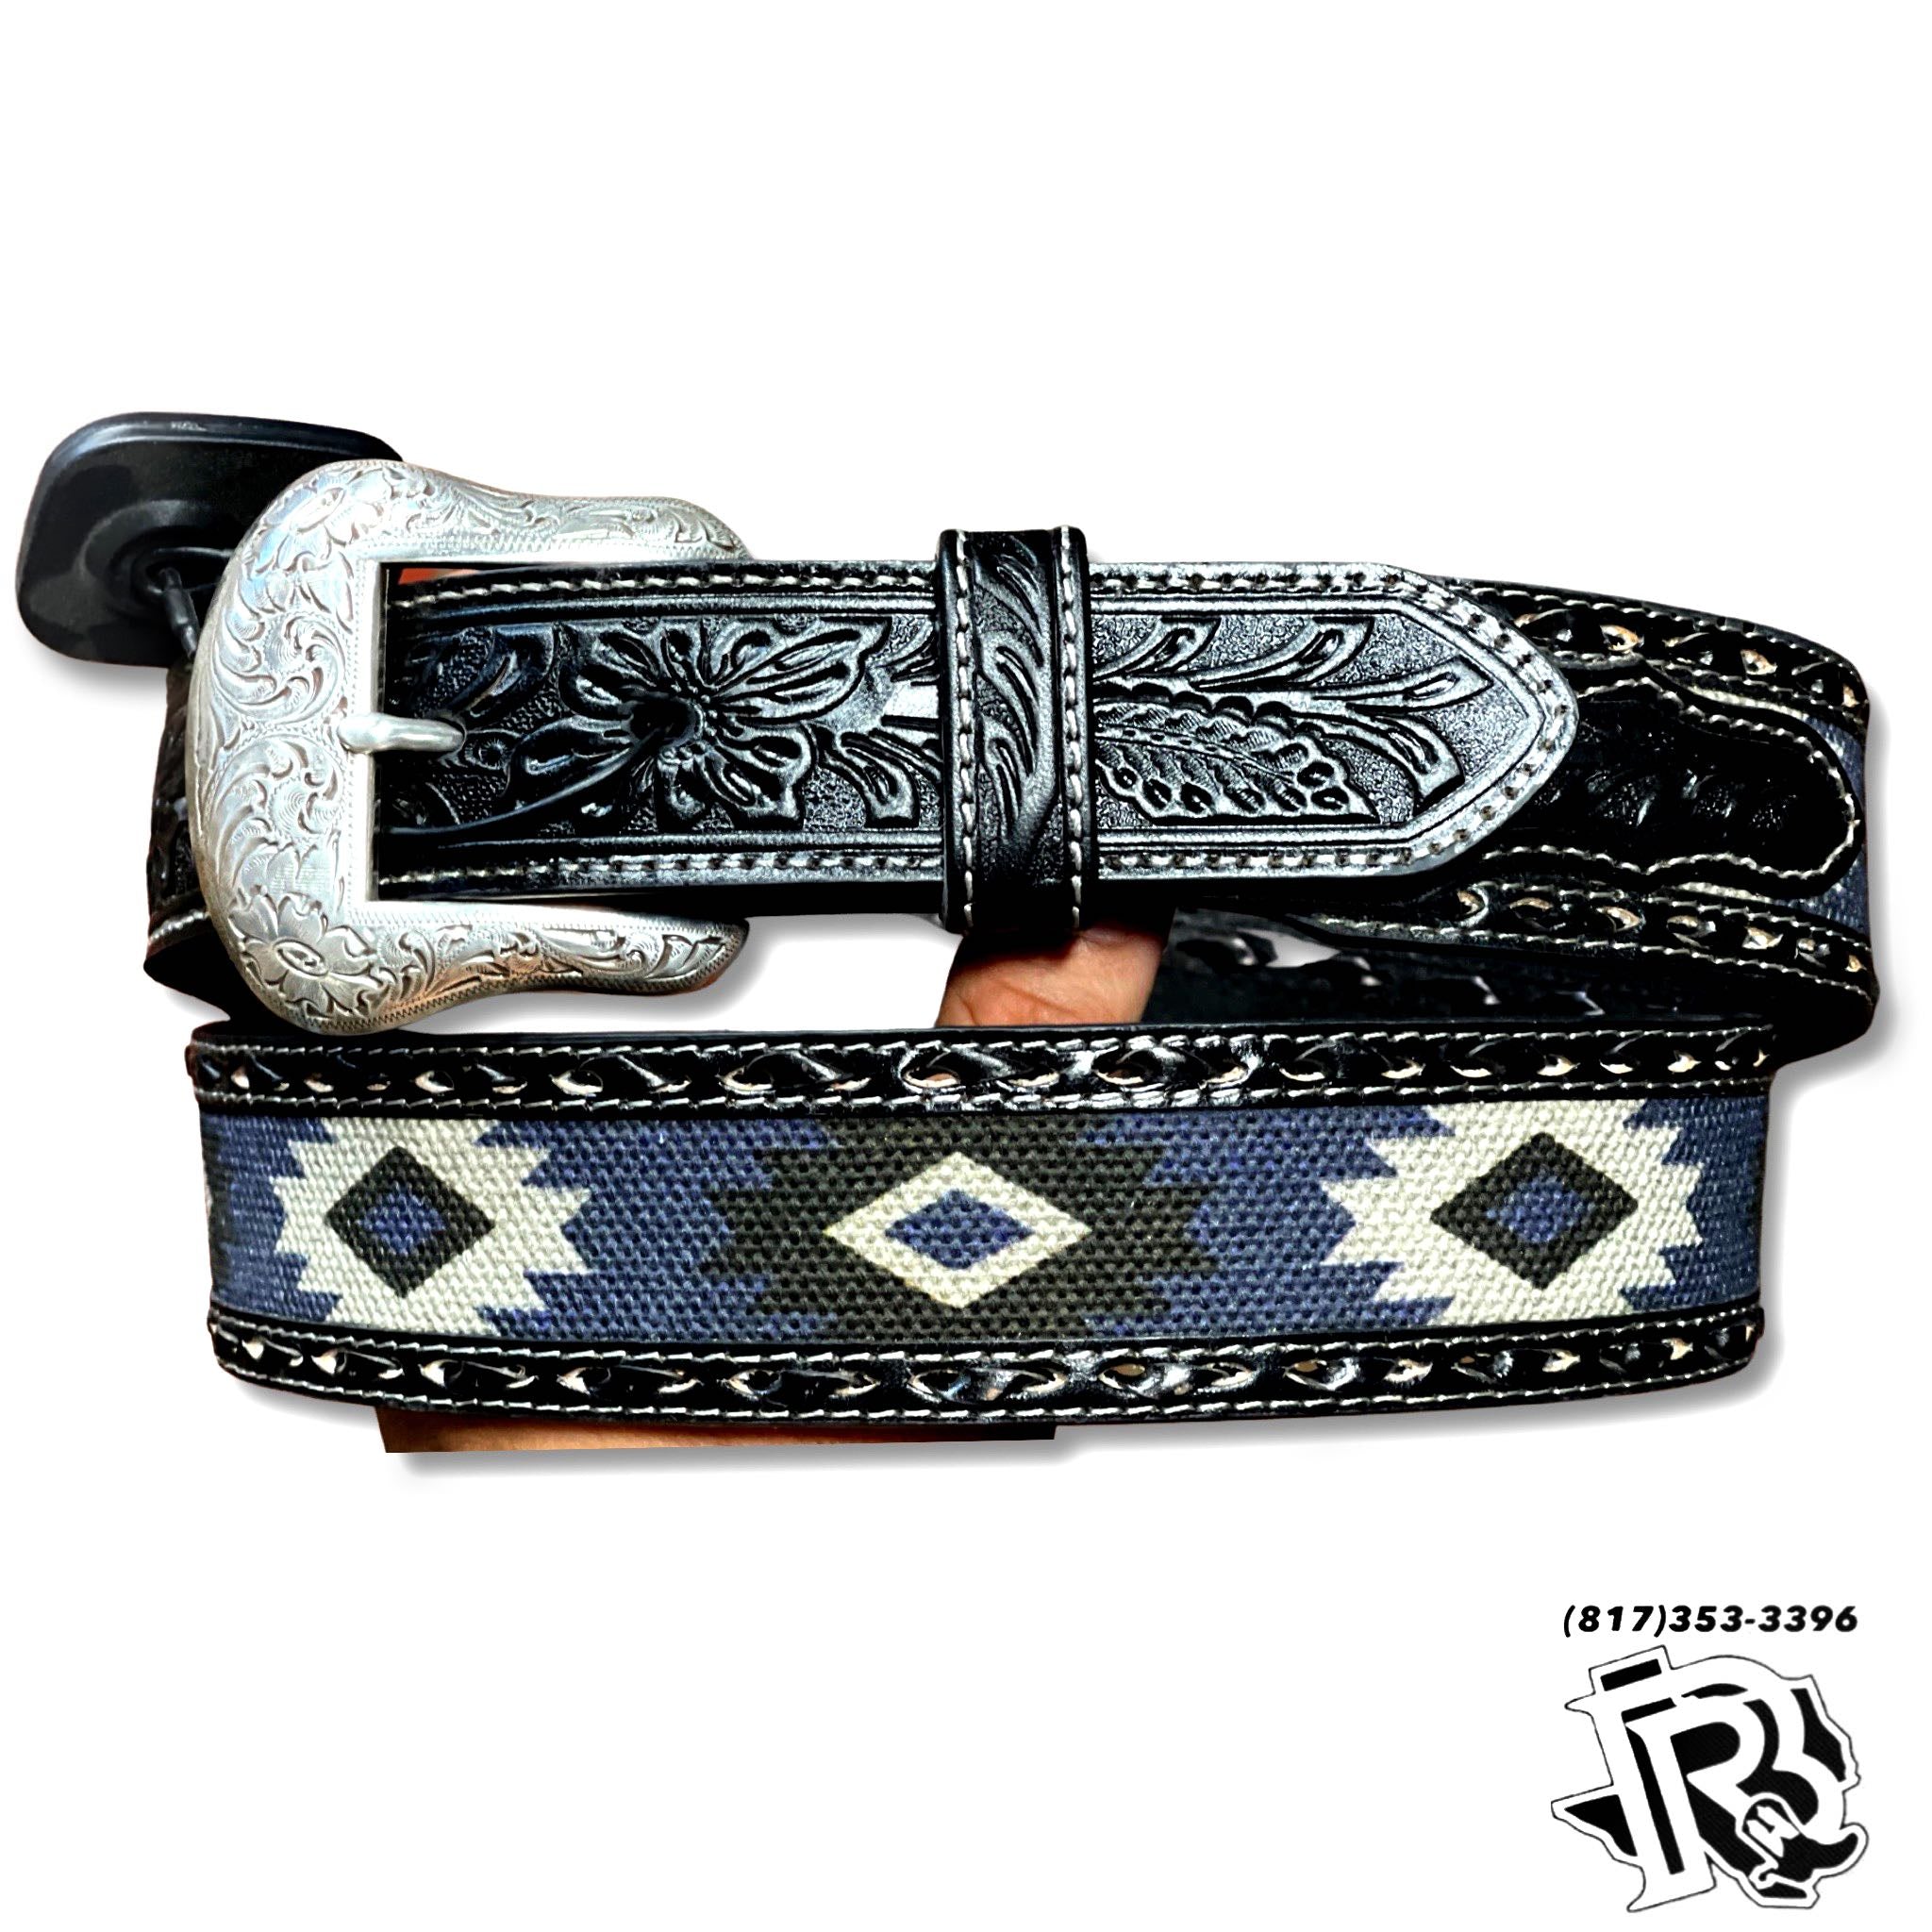 Blue and Black Beaded Leather Belt 